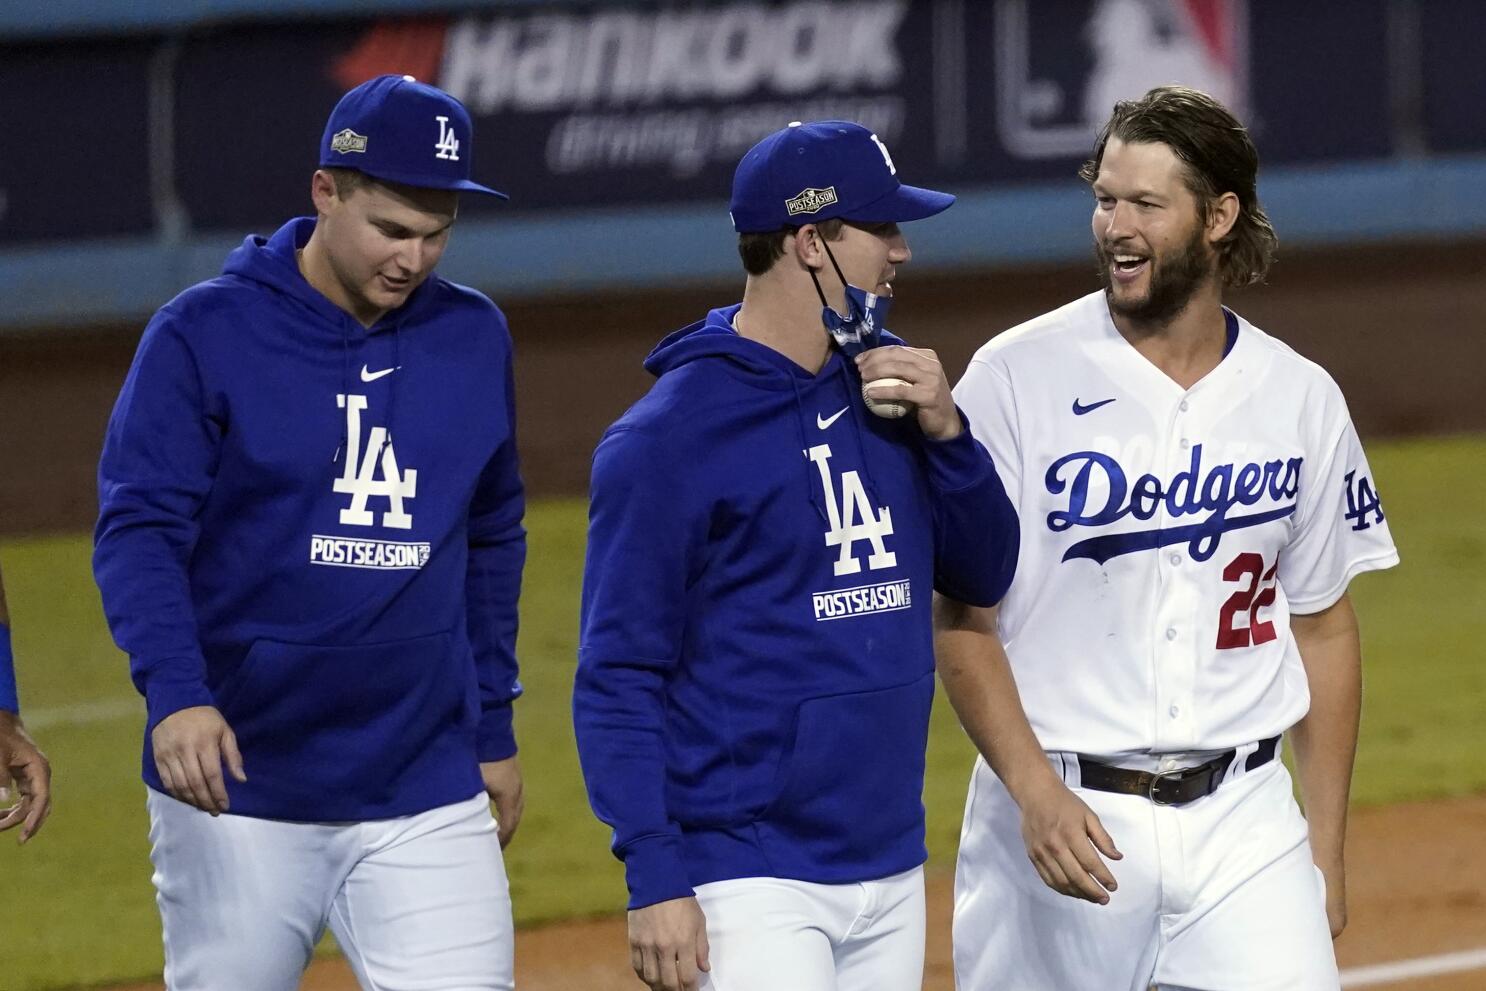 MLB Playoff Picture: Dodgers clinch division, Marlins make a move